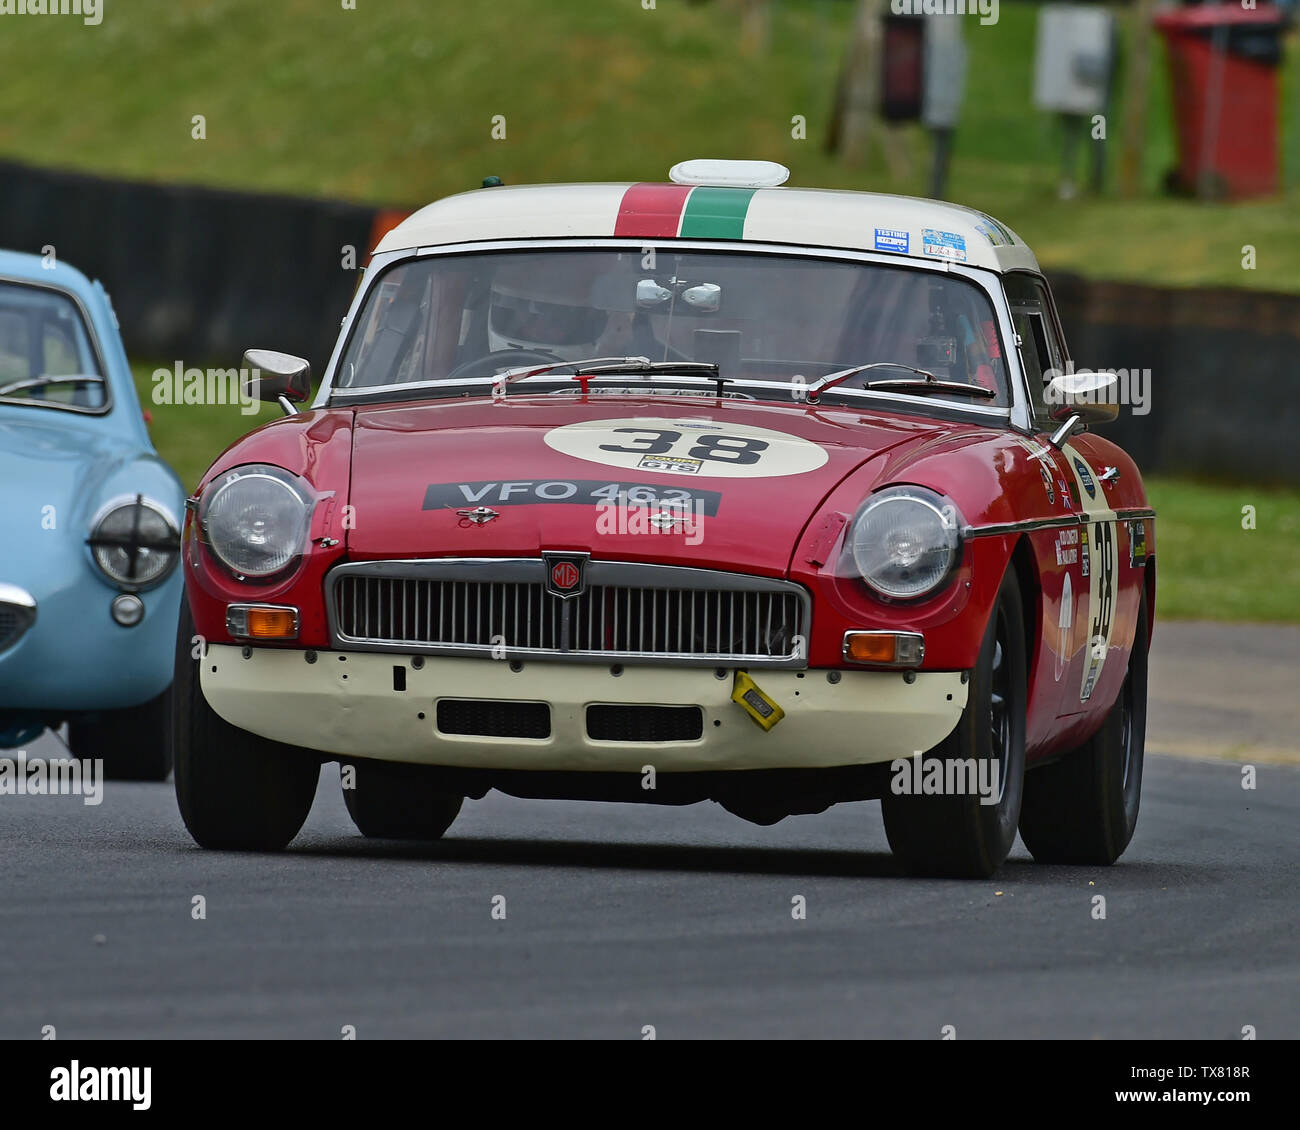 Paul Latimer, MGB, Equipe GTS, Masters Historic Festival, Brands Hatch, May 2019. Brands Hatch, classic cars, classic event, Classic Racing Cars, FIA, Stock Photo